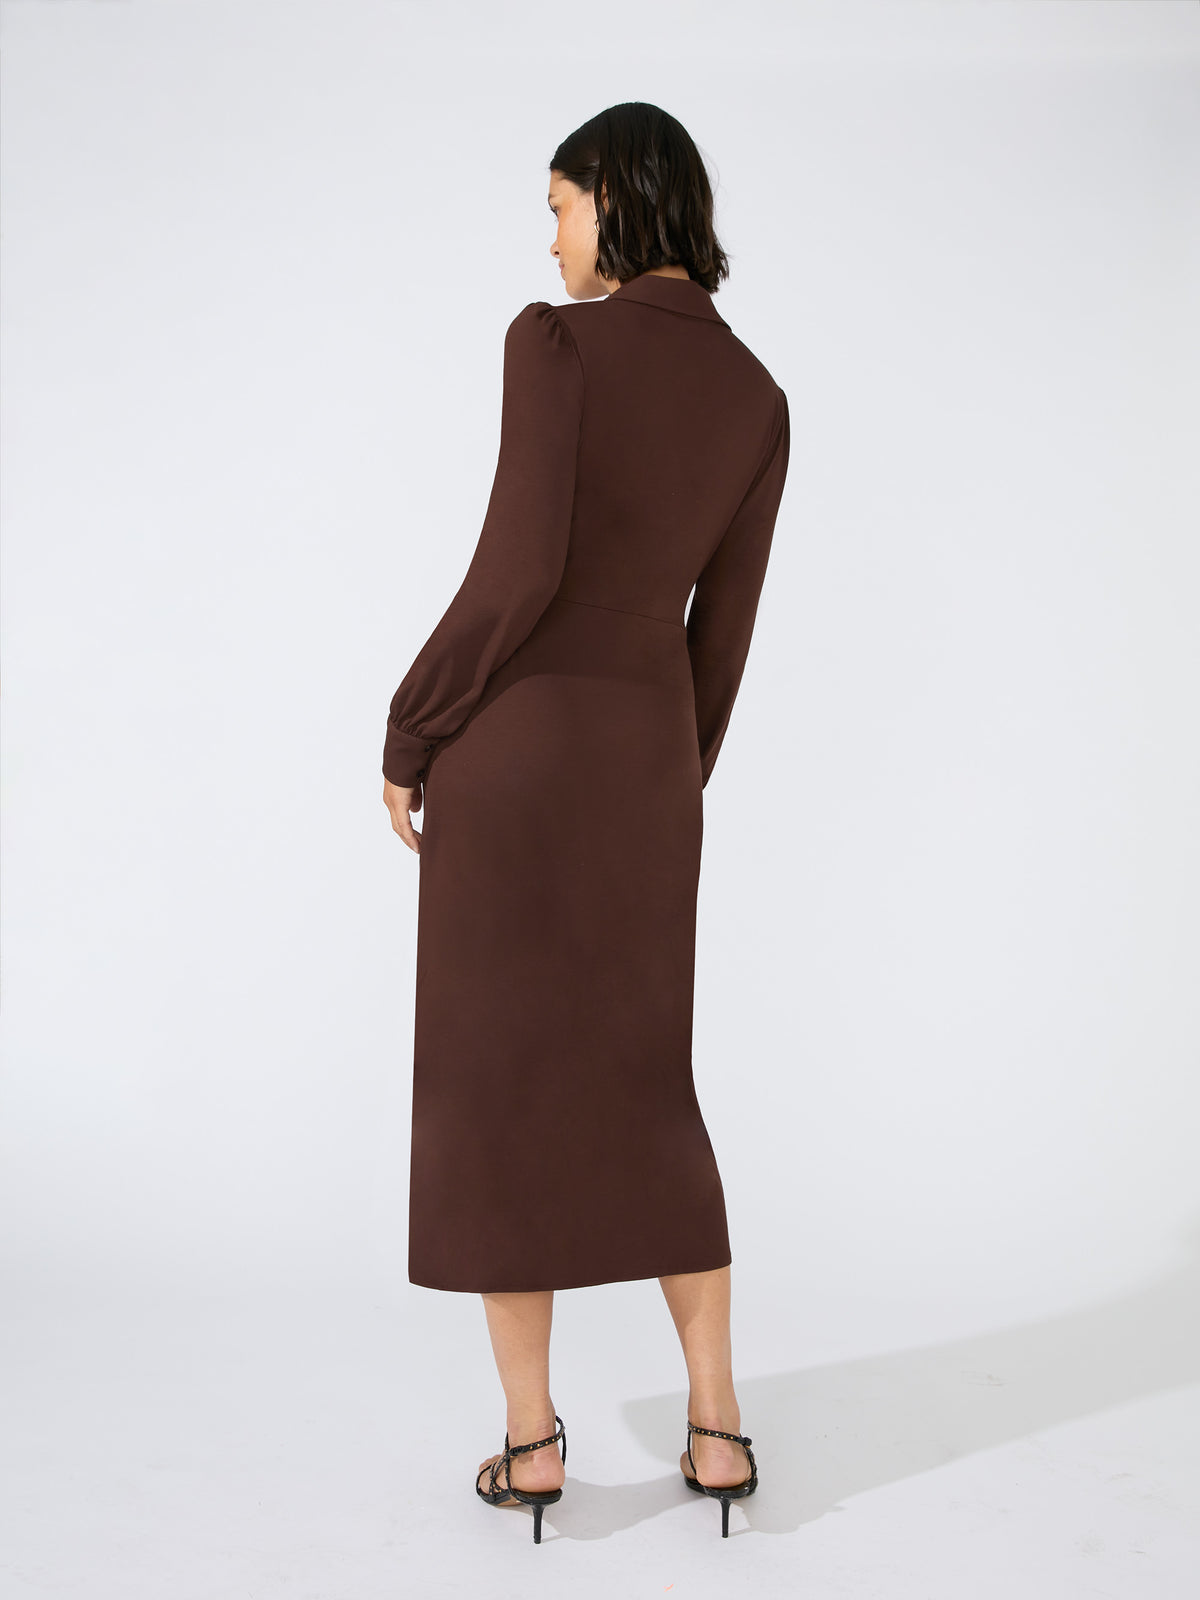 Petite Brown Jersey Ruched Front Dress